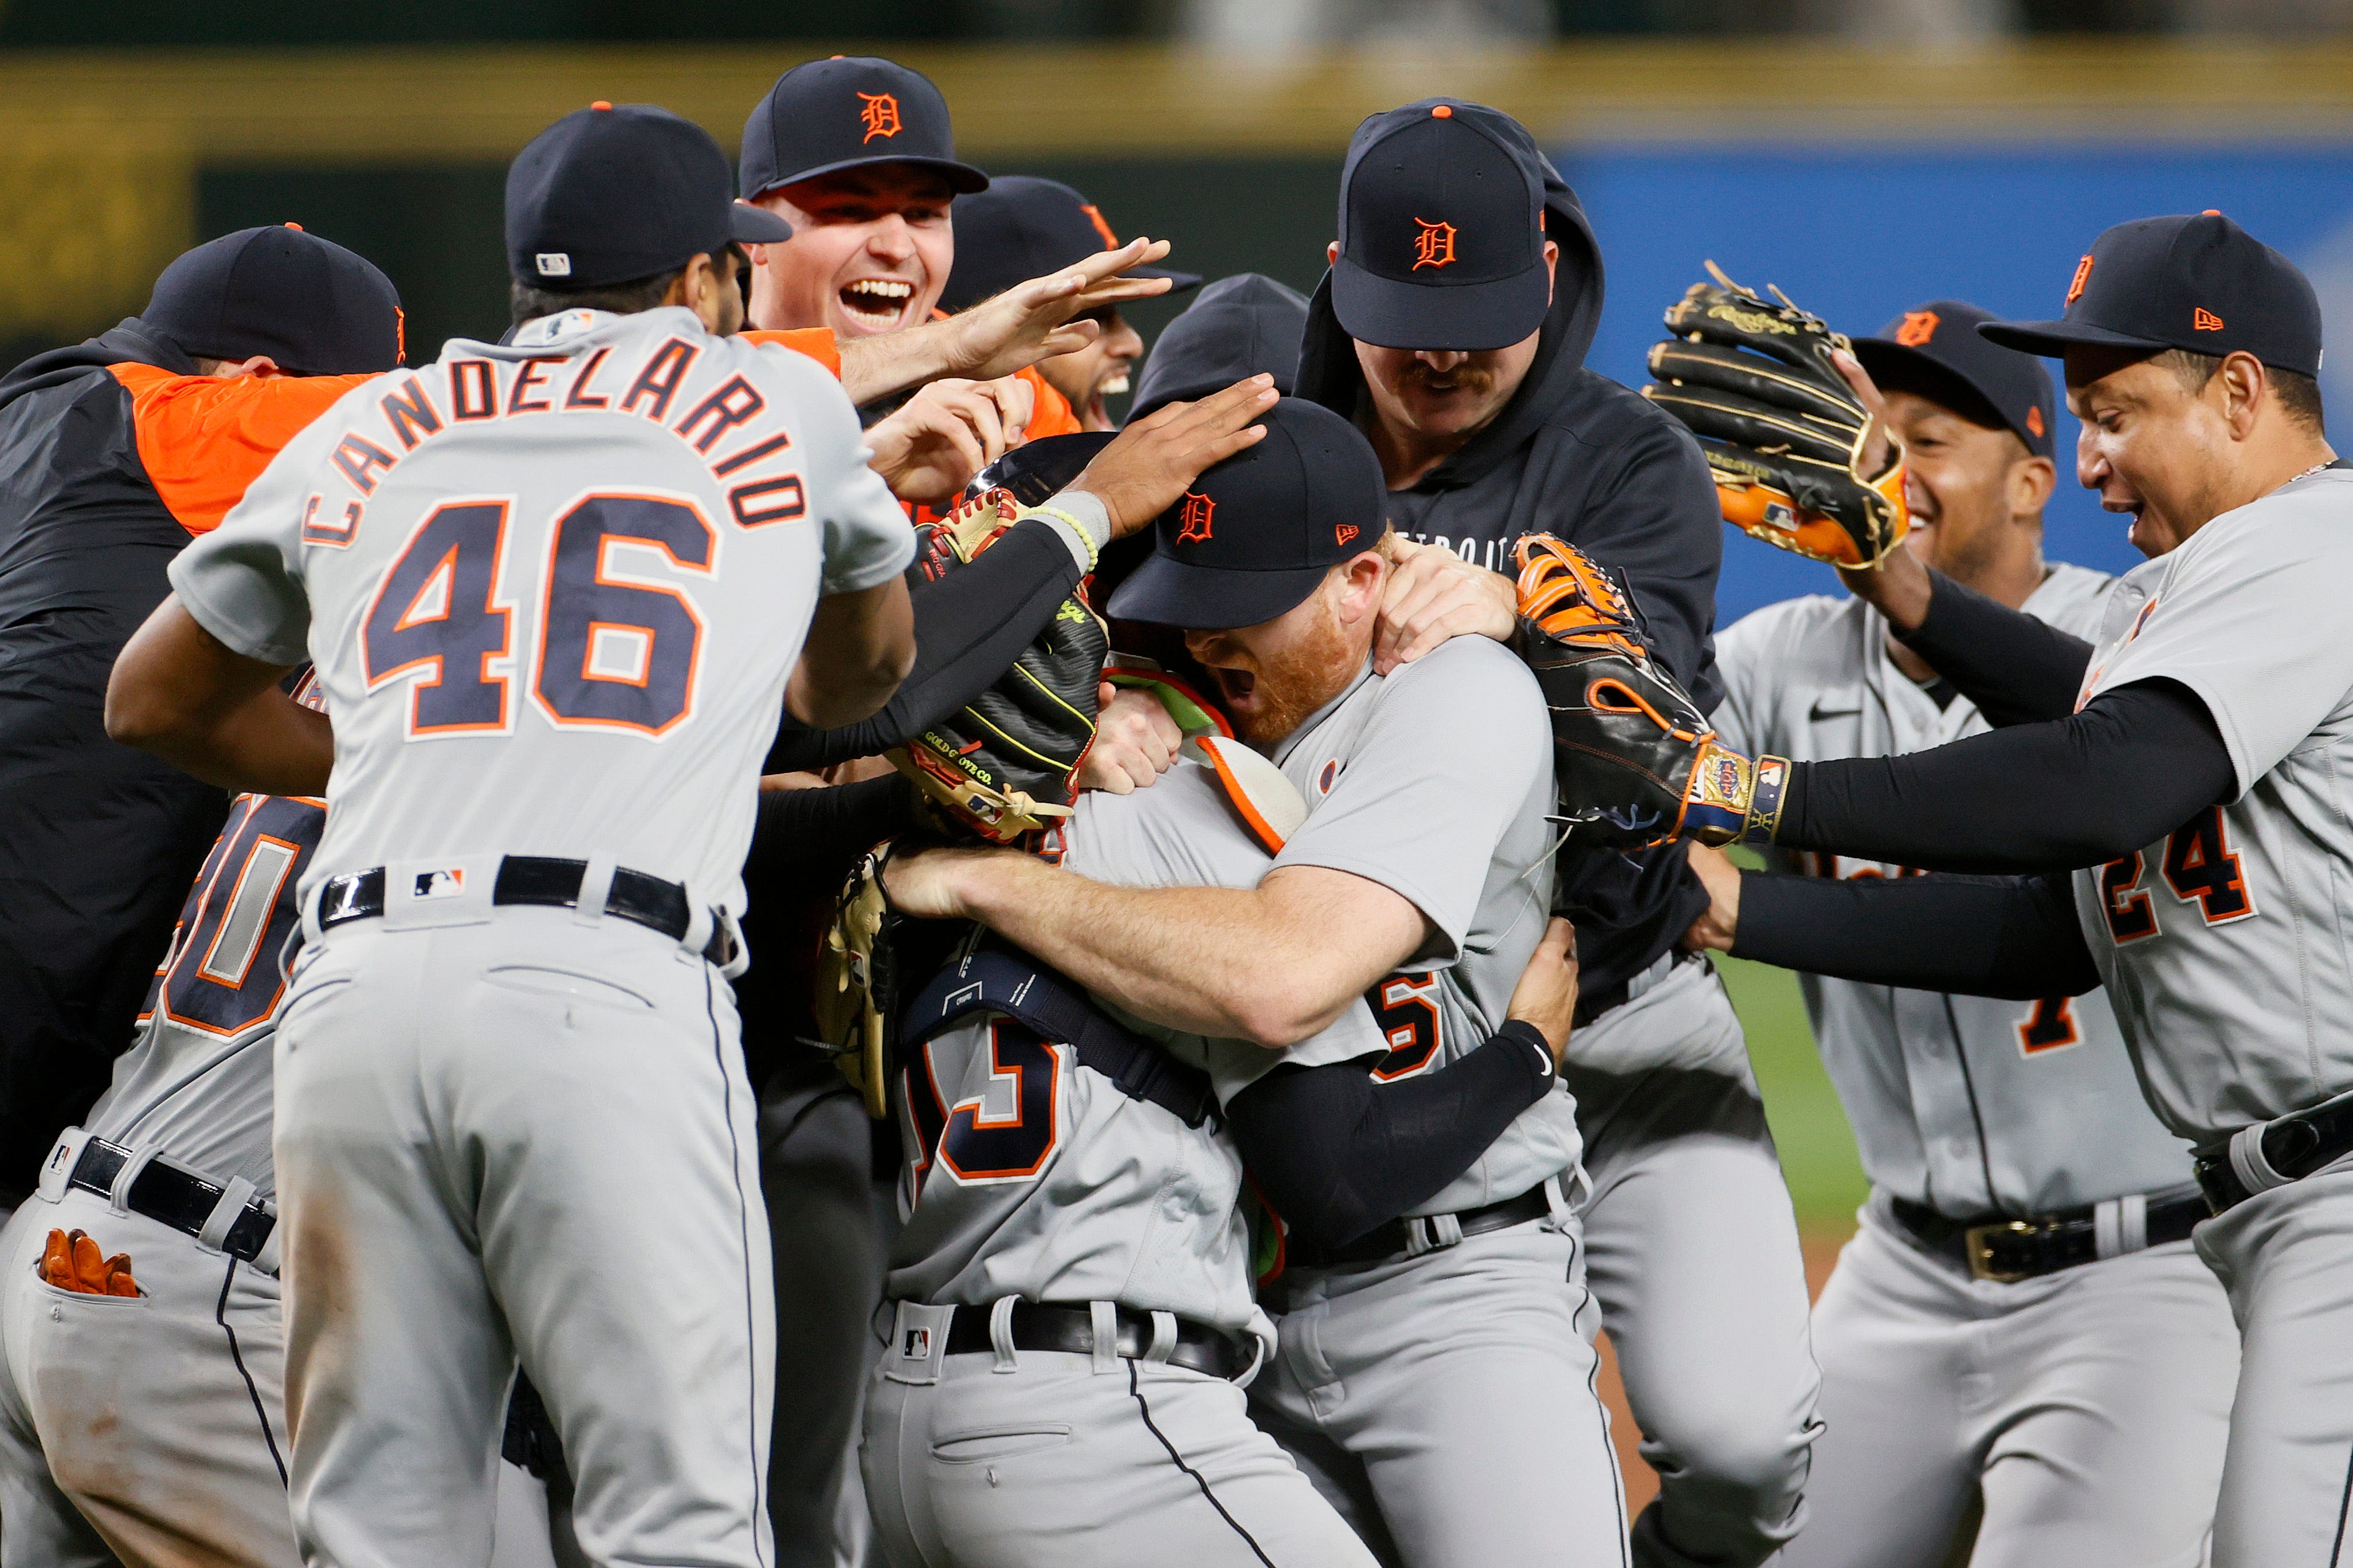 Spencer Turnbull of the Detroit Tigers celebrates with his teammates after his no-hitter against the Seattle Mariners at T-Mobile Park on May 18, 2021 in Seattle. The Tigers beat the Mariners 5-0.